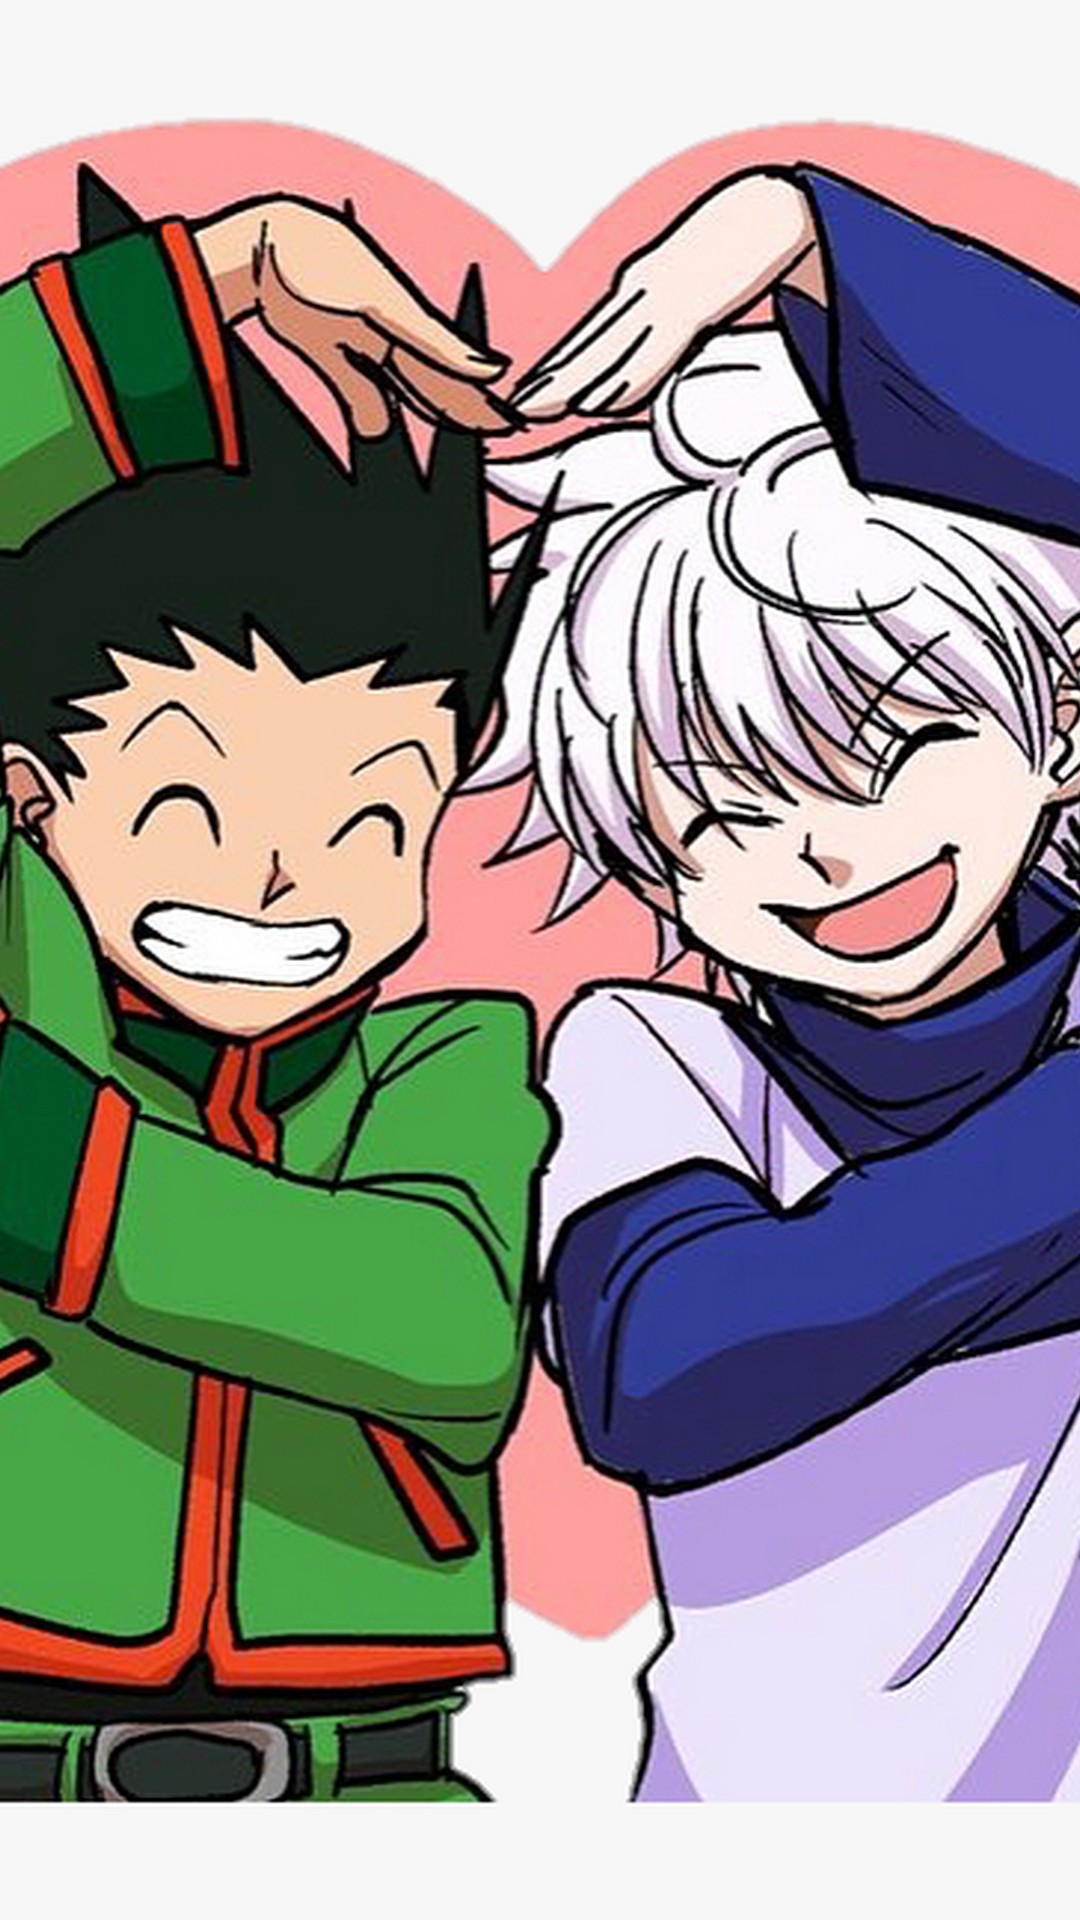 Gon And Killua iPhone Home Screen Wallpaper With high-resolution 1080X1920 pixel. You can set as wallpaper for Apple iPhone X, XS Max, XR, 8, 7, 6, SE, iPad. Enjoy and share your favorite HD wallpapers and background images